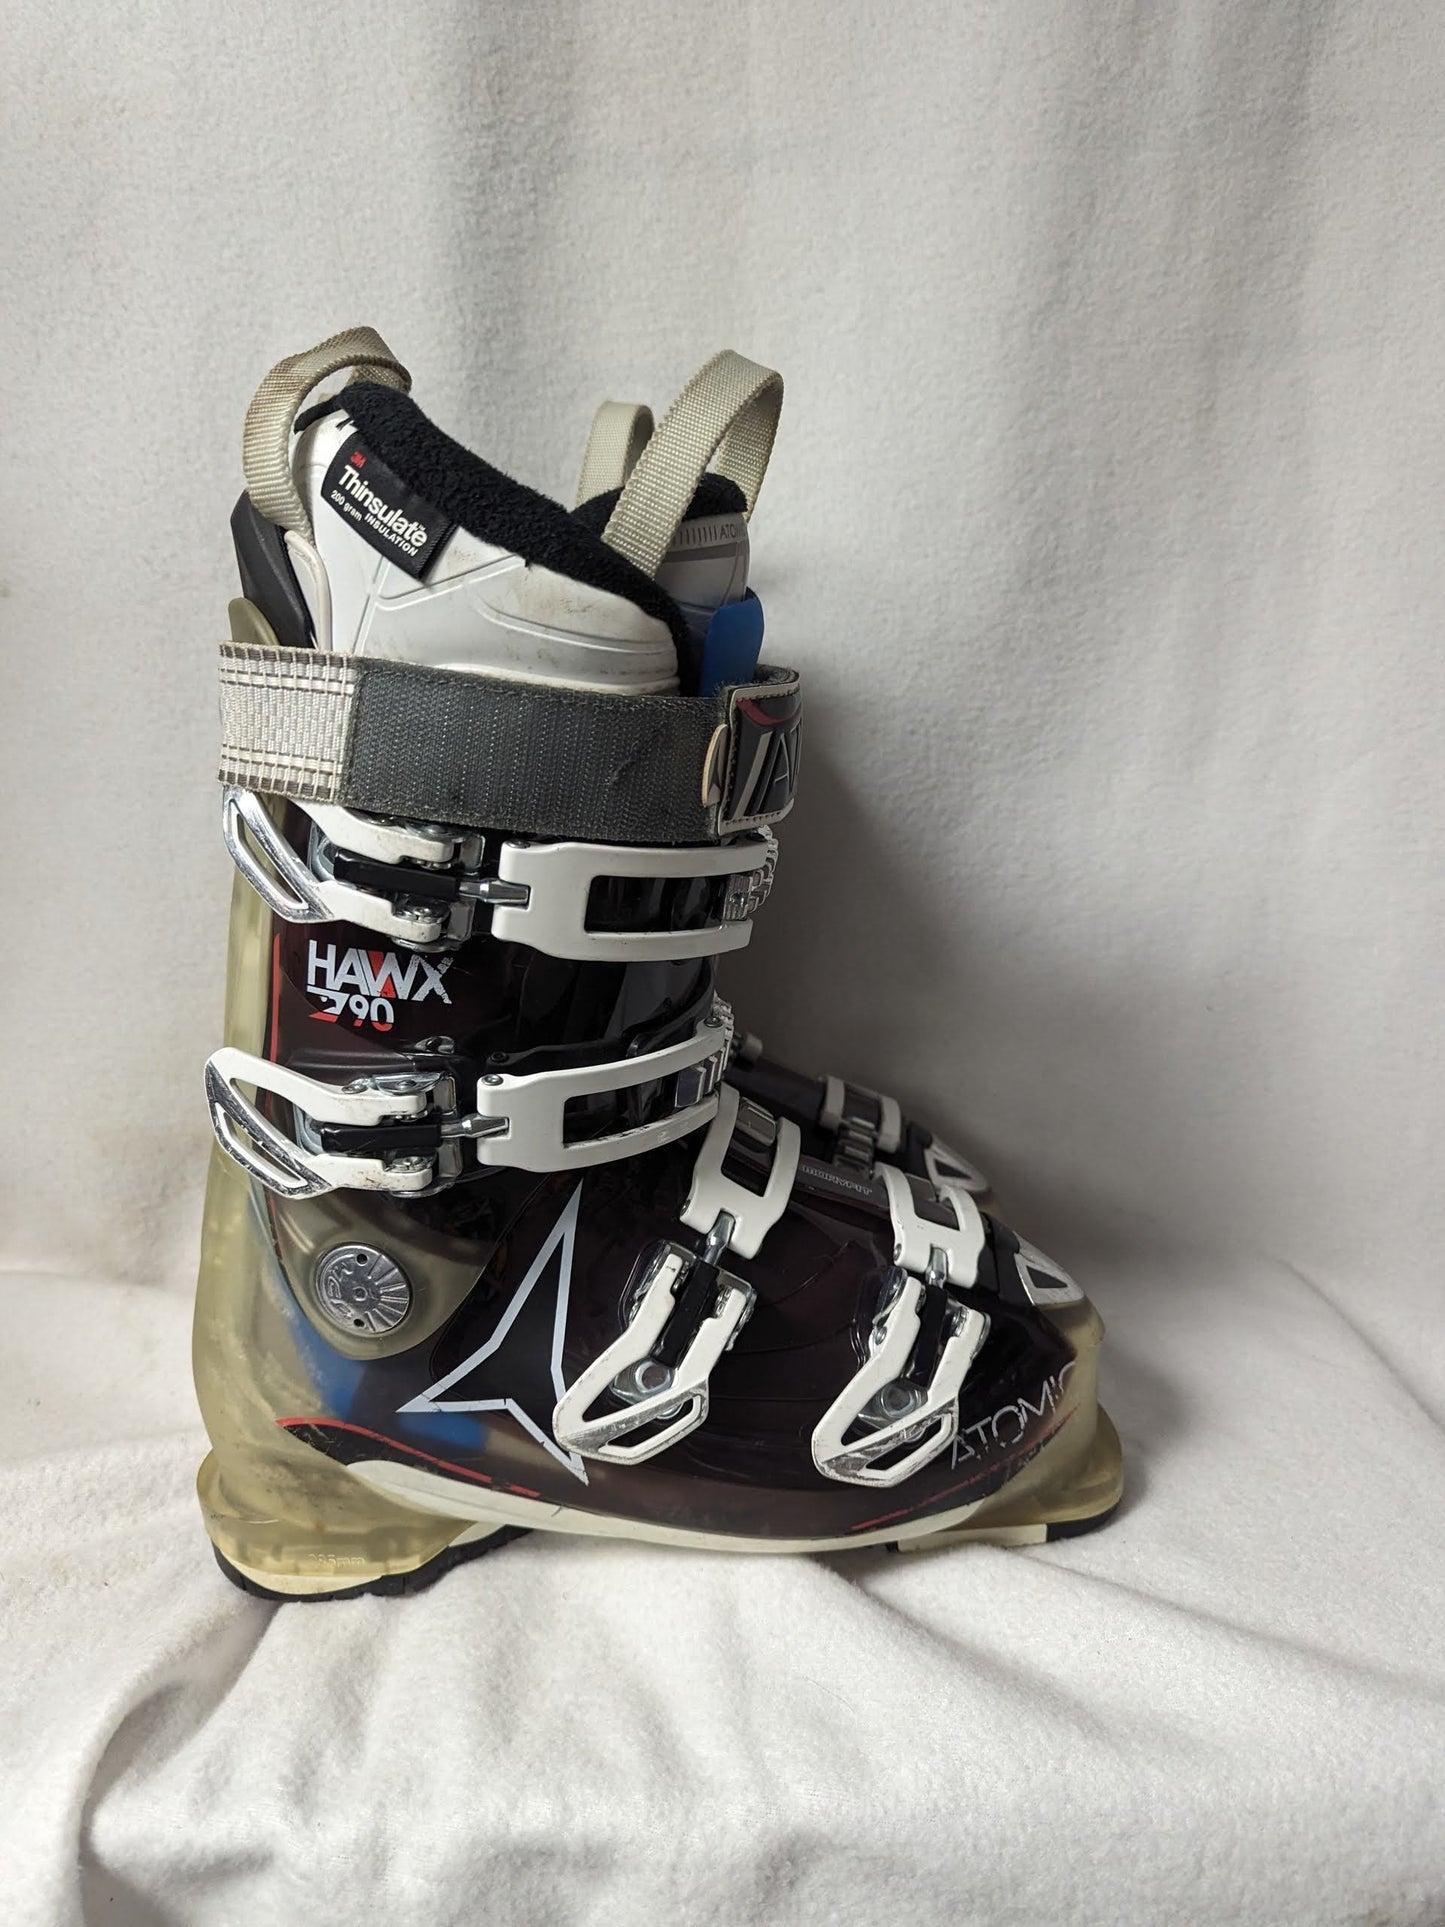 Atomic Hawx 90 Ski Boots Size 25 Color Purple Condition Used